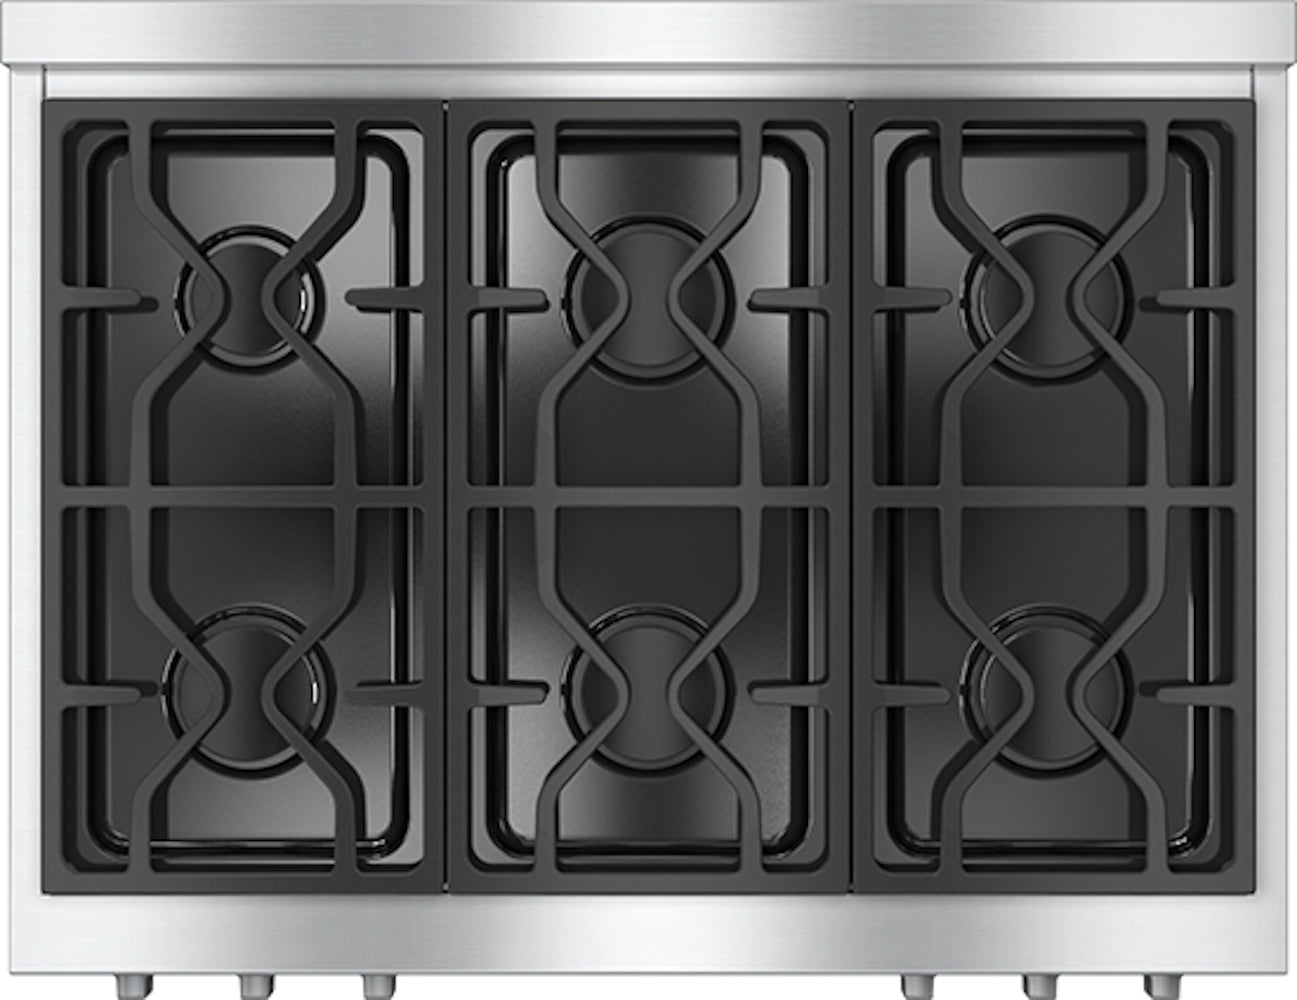 Miele - 36 Inch Gas Cooktop in Stainless - KMR 1134-3 LP